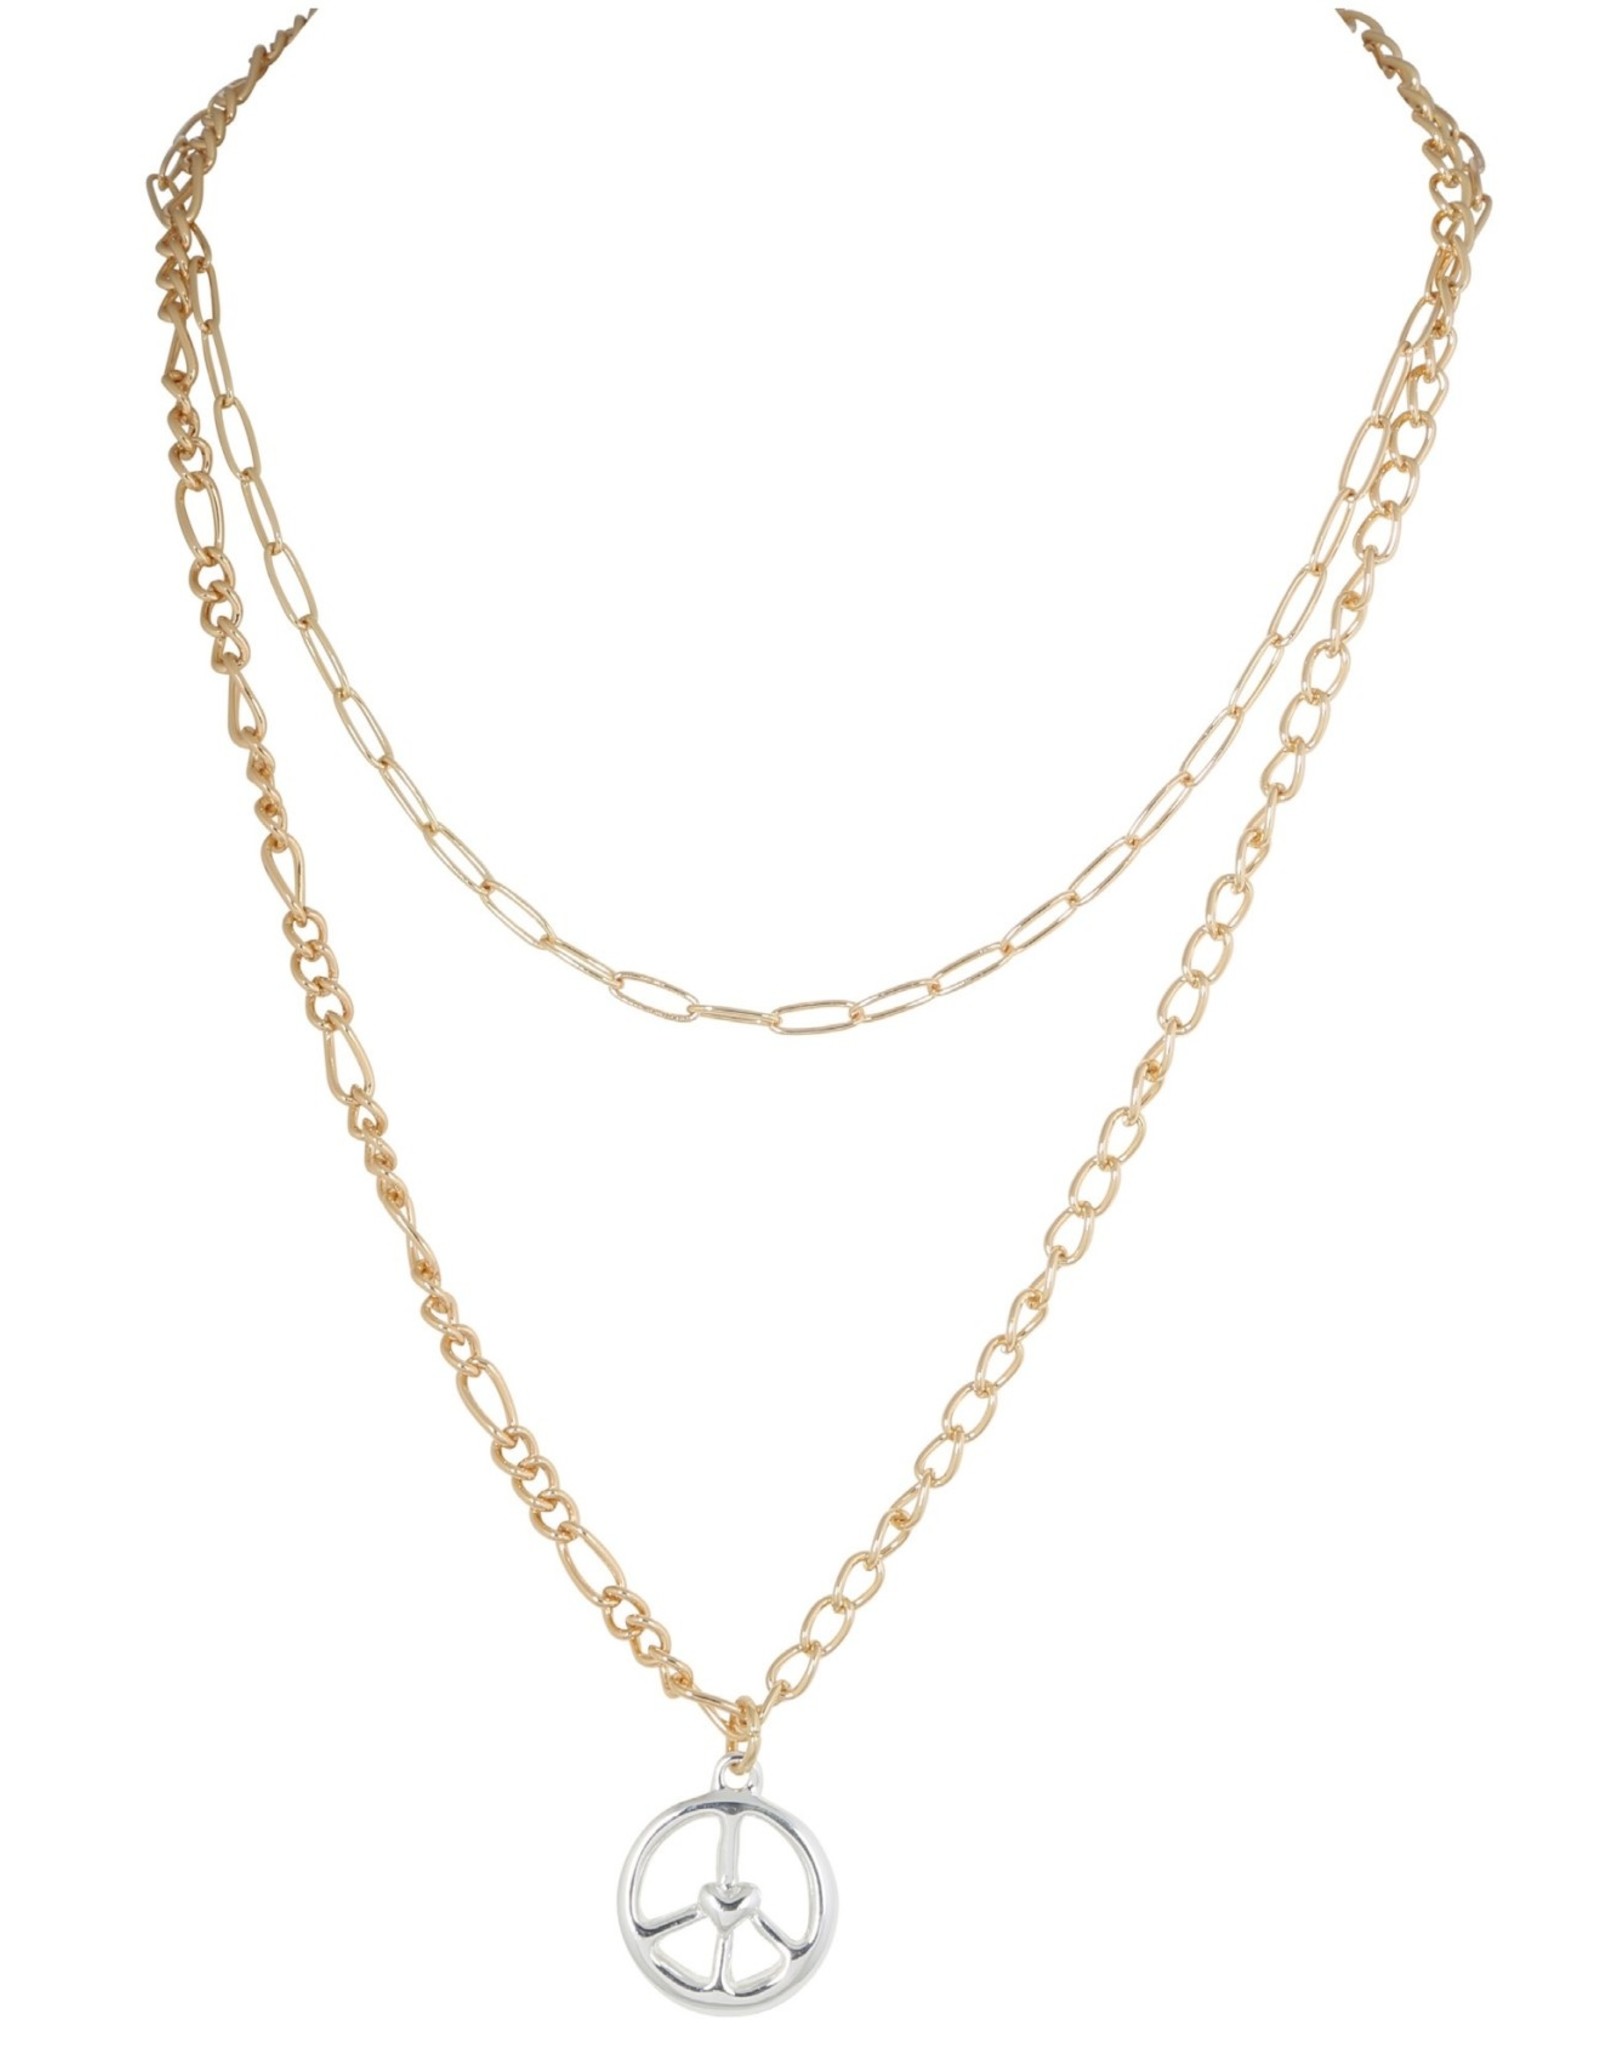 Merx Inc. 2 Layer Peace Necklace Gold